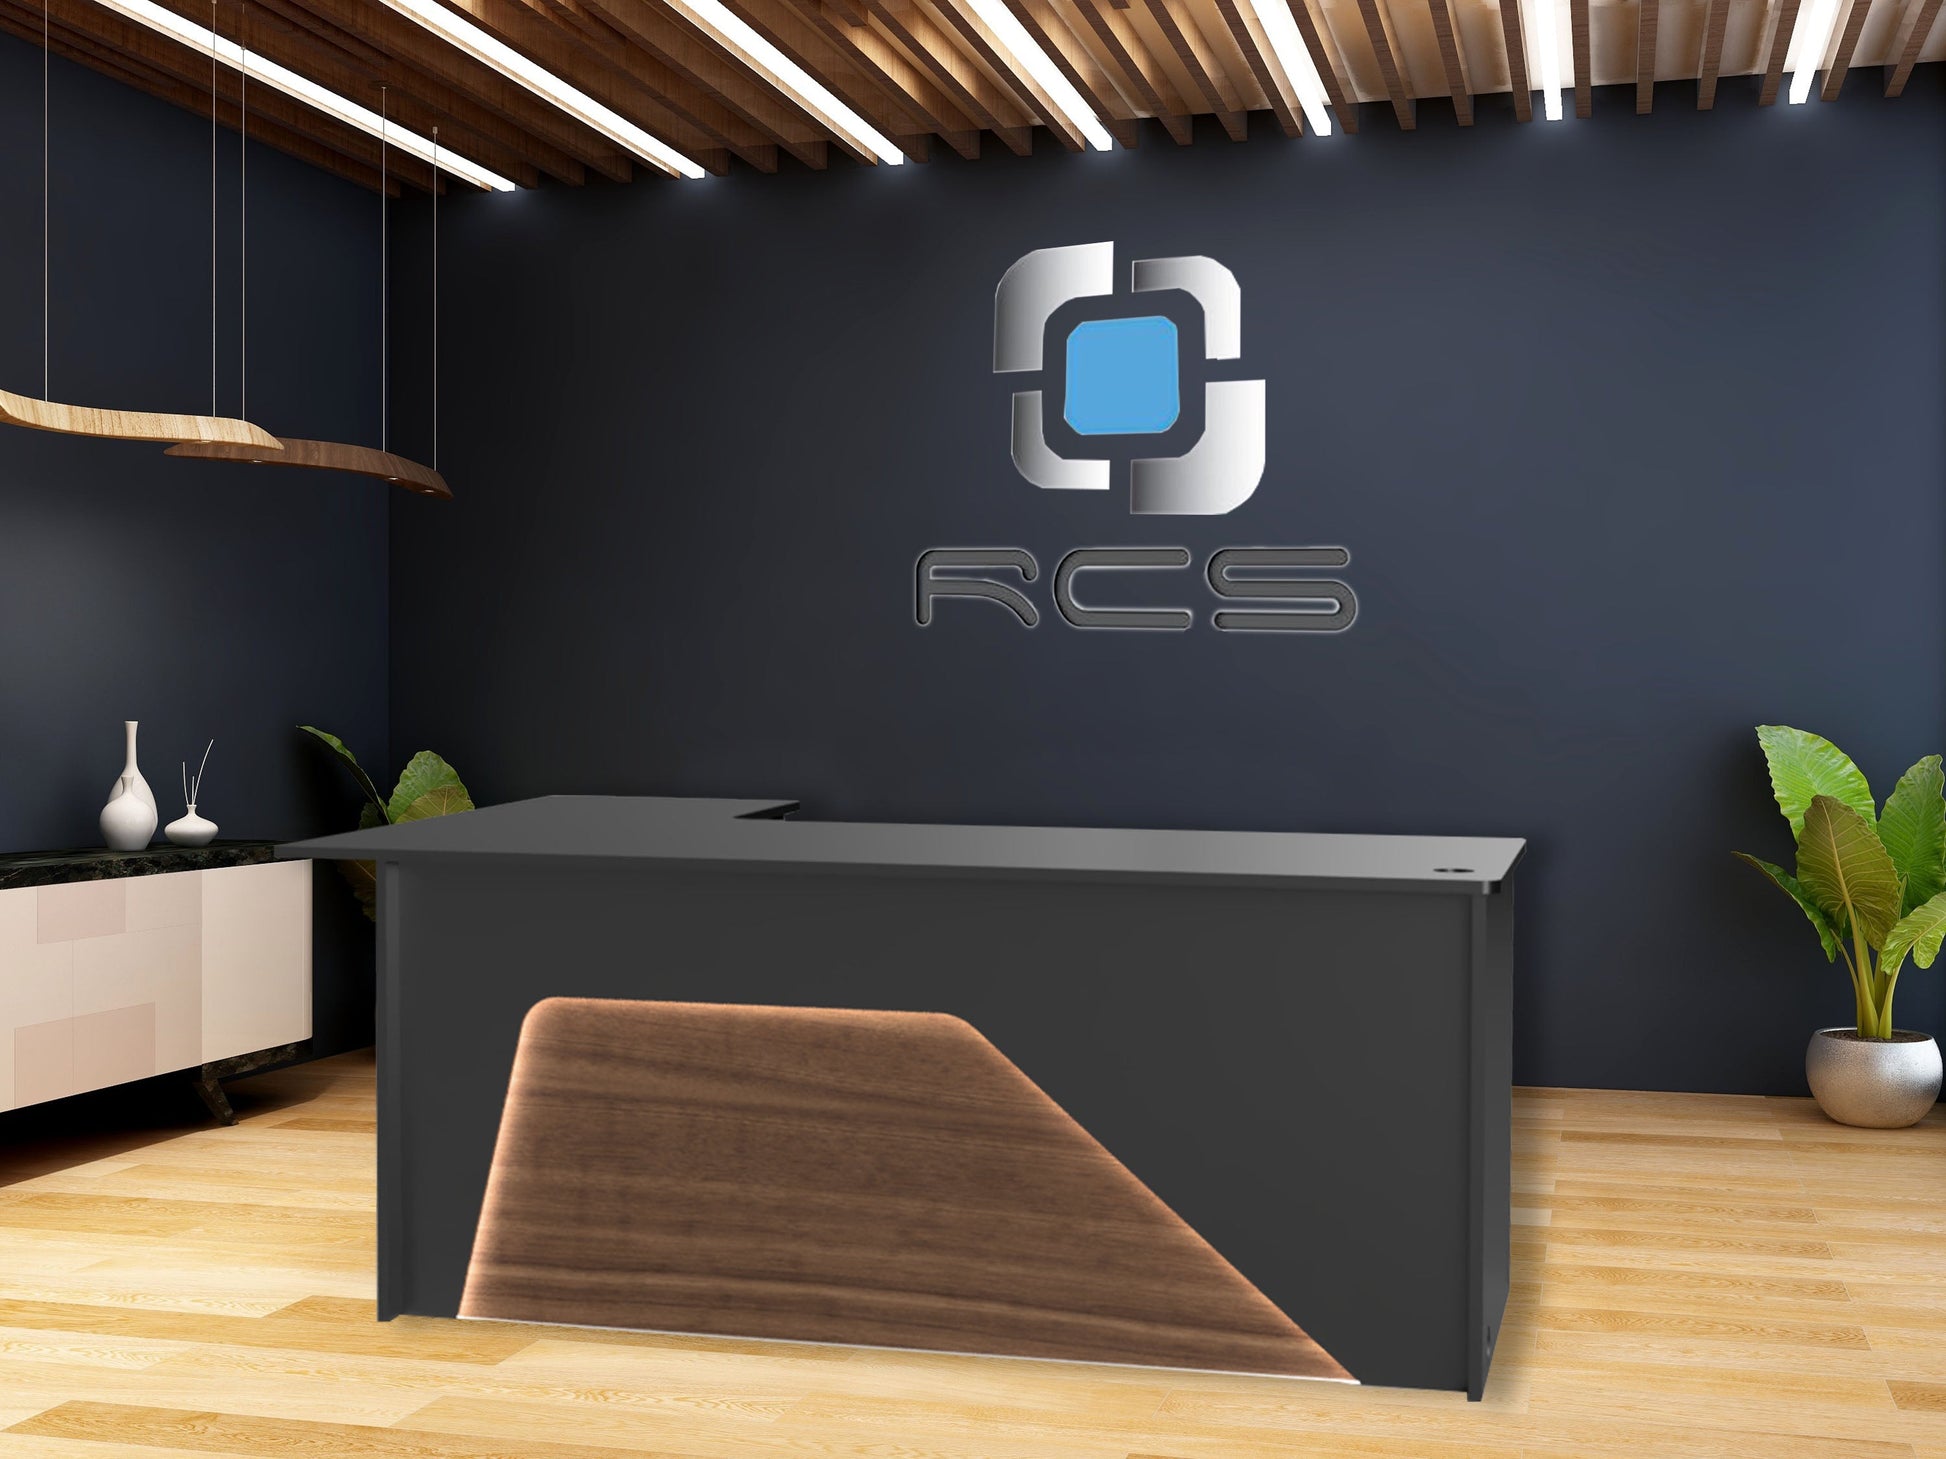 An elegant and streamlined modern office desk with a sleek design. The desk features a minimalist aesthetic with clean lines, a smooth surface, and a contemporary color scheme. It includes ample workspace, integrated storage compartments, and stylish metal or wooden legs. Perfect for a productive and modern work environment